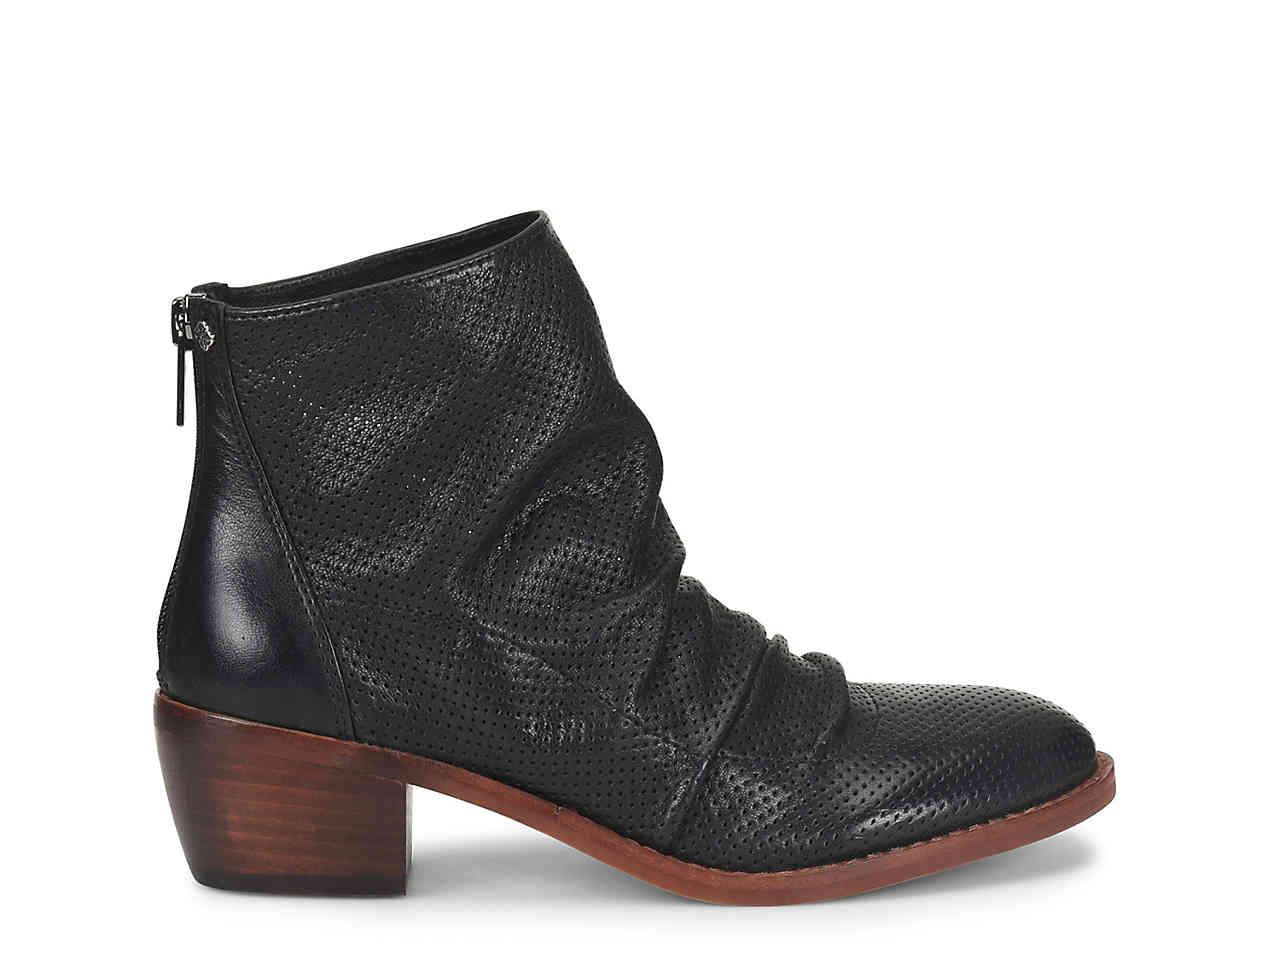 Isola Leather Sancia Bootie in Black - Lyst